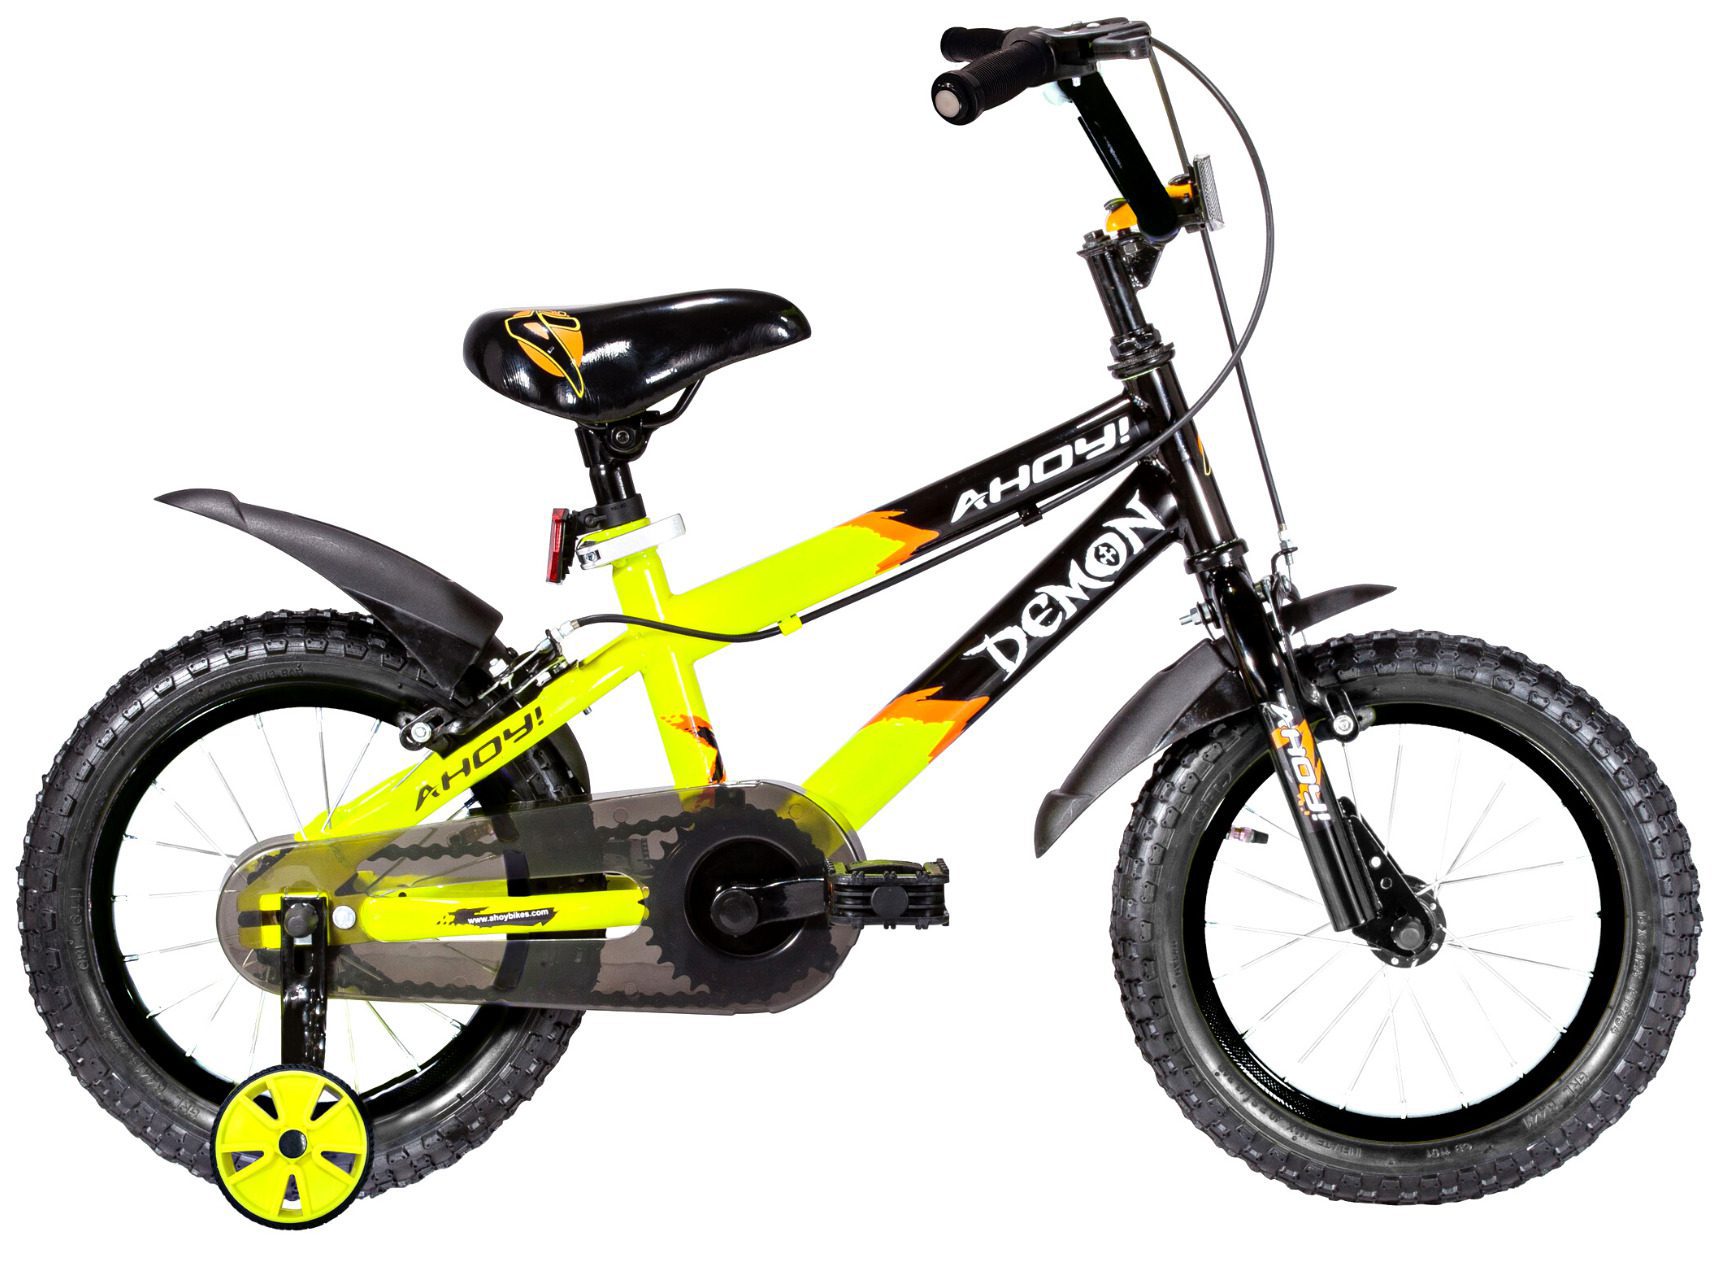 Demon Cycle for 5 Year Kids 14T | Buy Yellow Non Gear Cycle